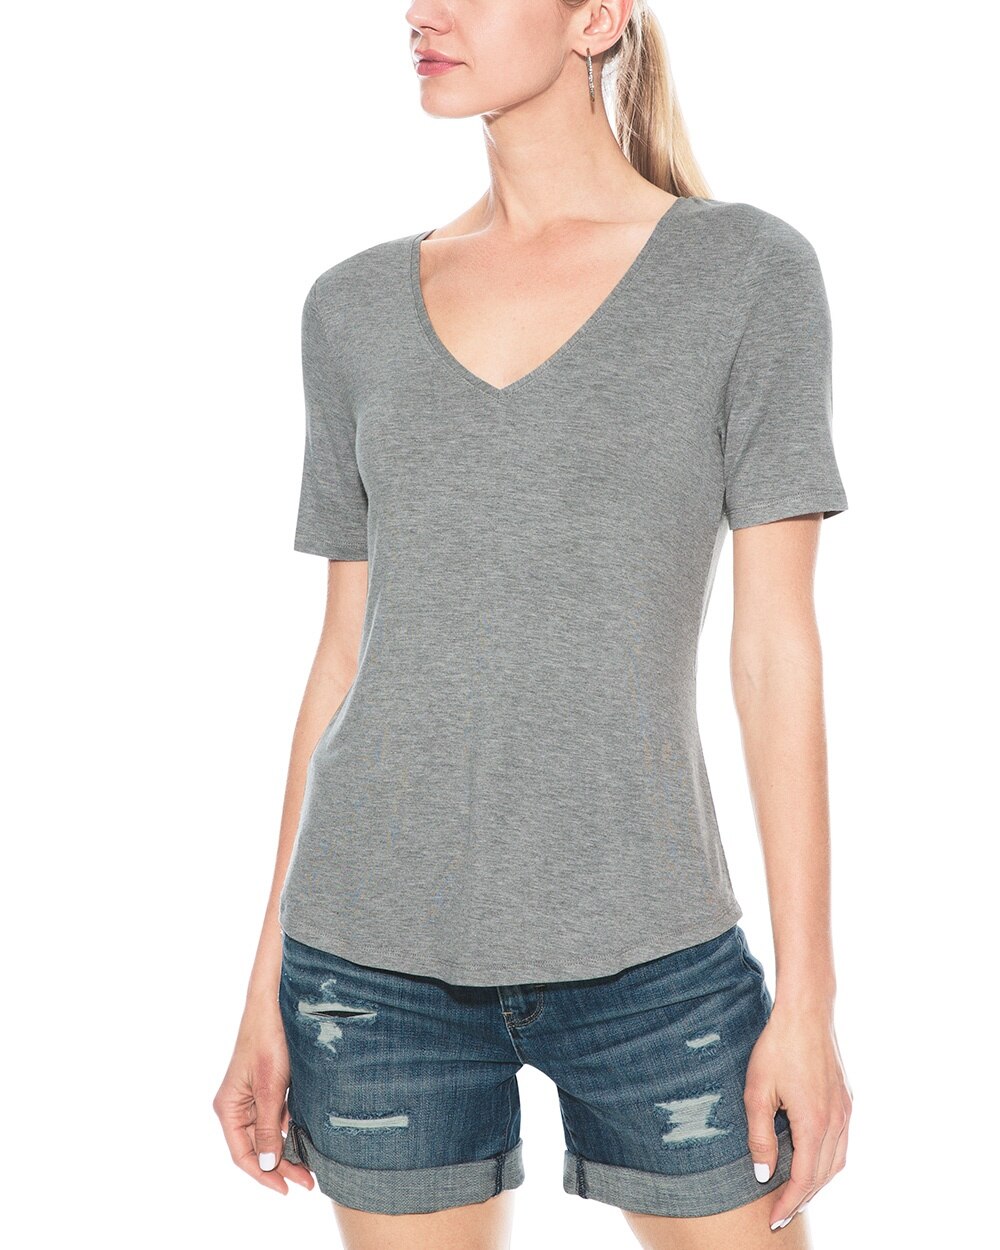 Outlet WHBM Gray V-Neck Foundation Tee